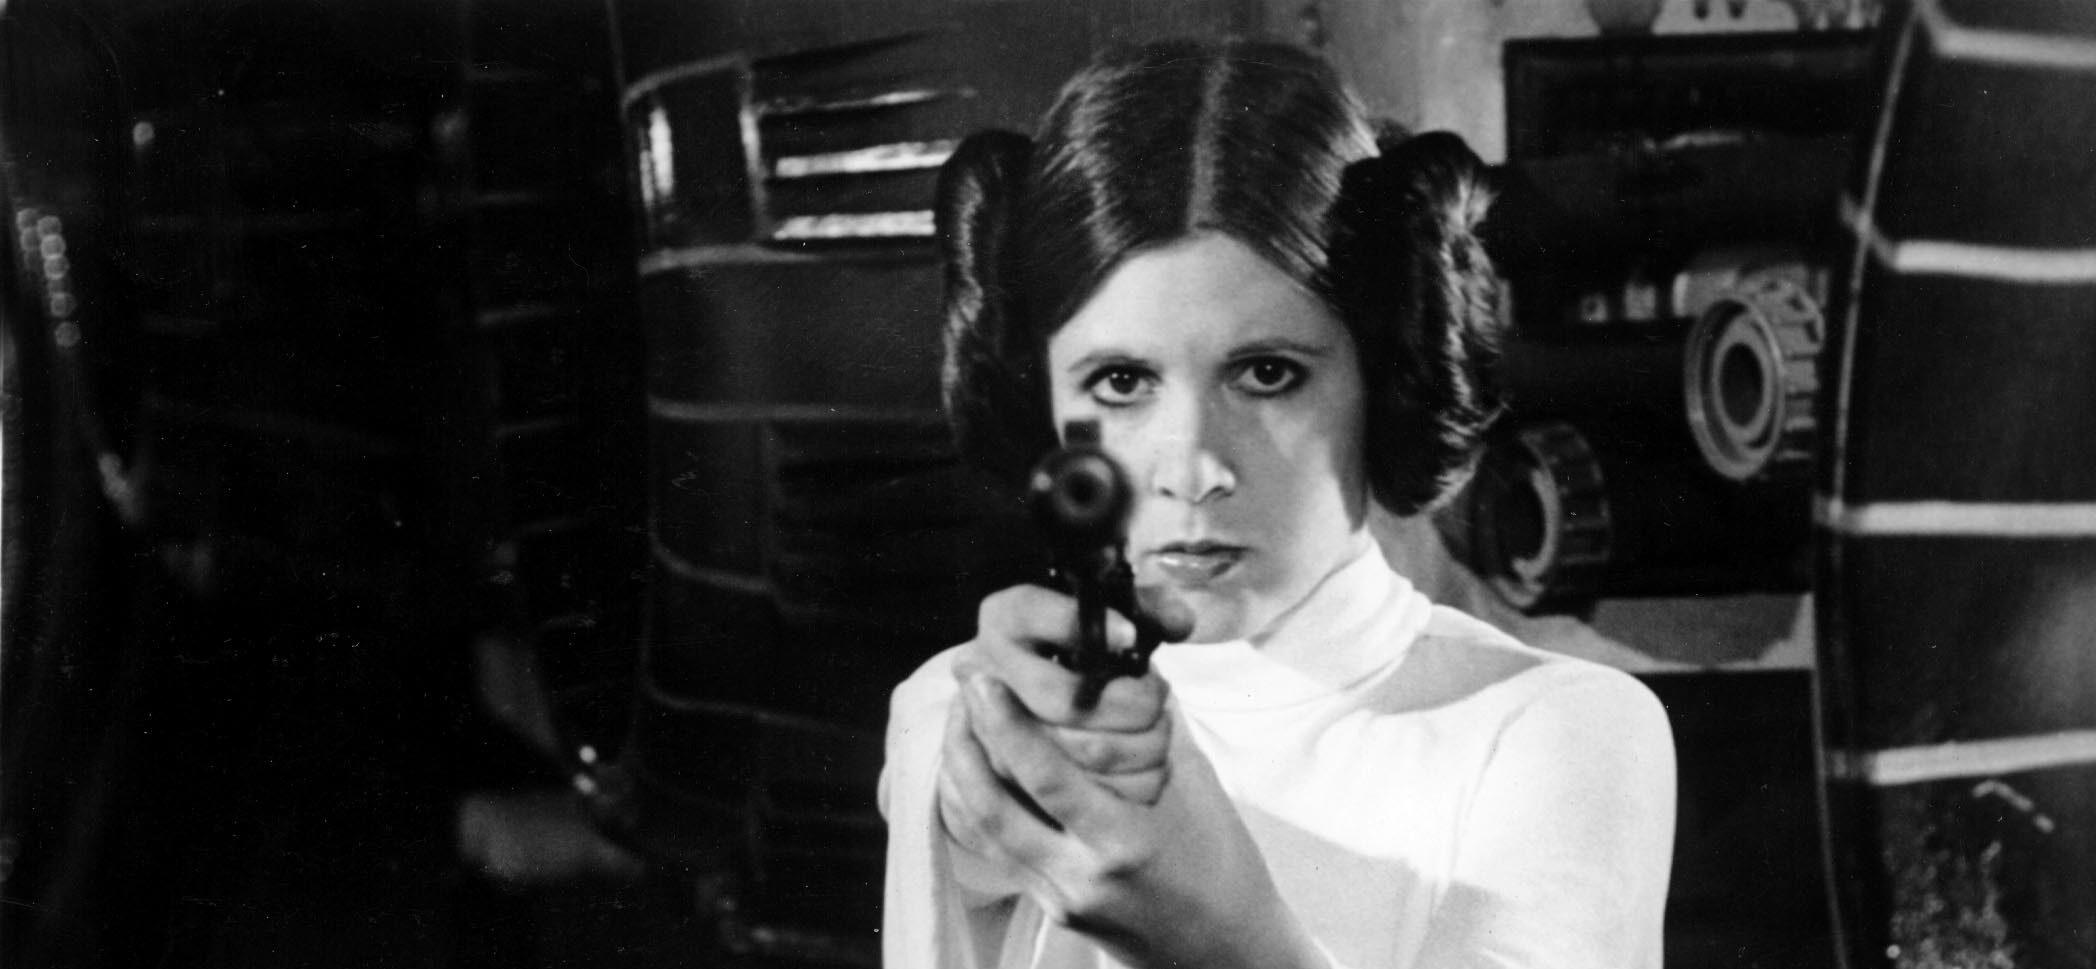 Carrie Fisher appears in a black and white photo as Princess Leia in Star Wars